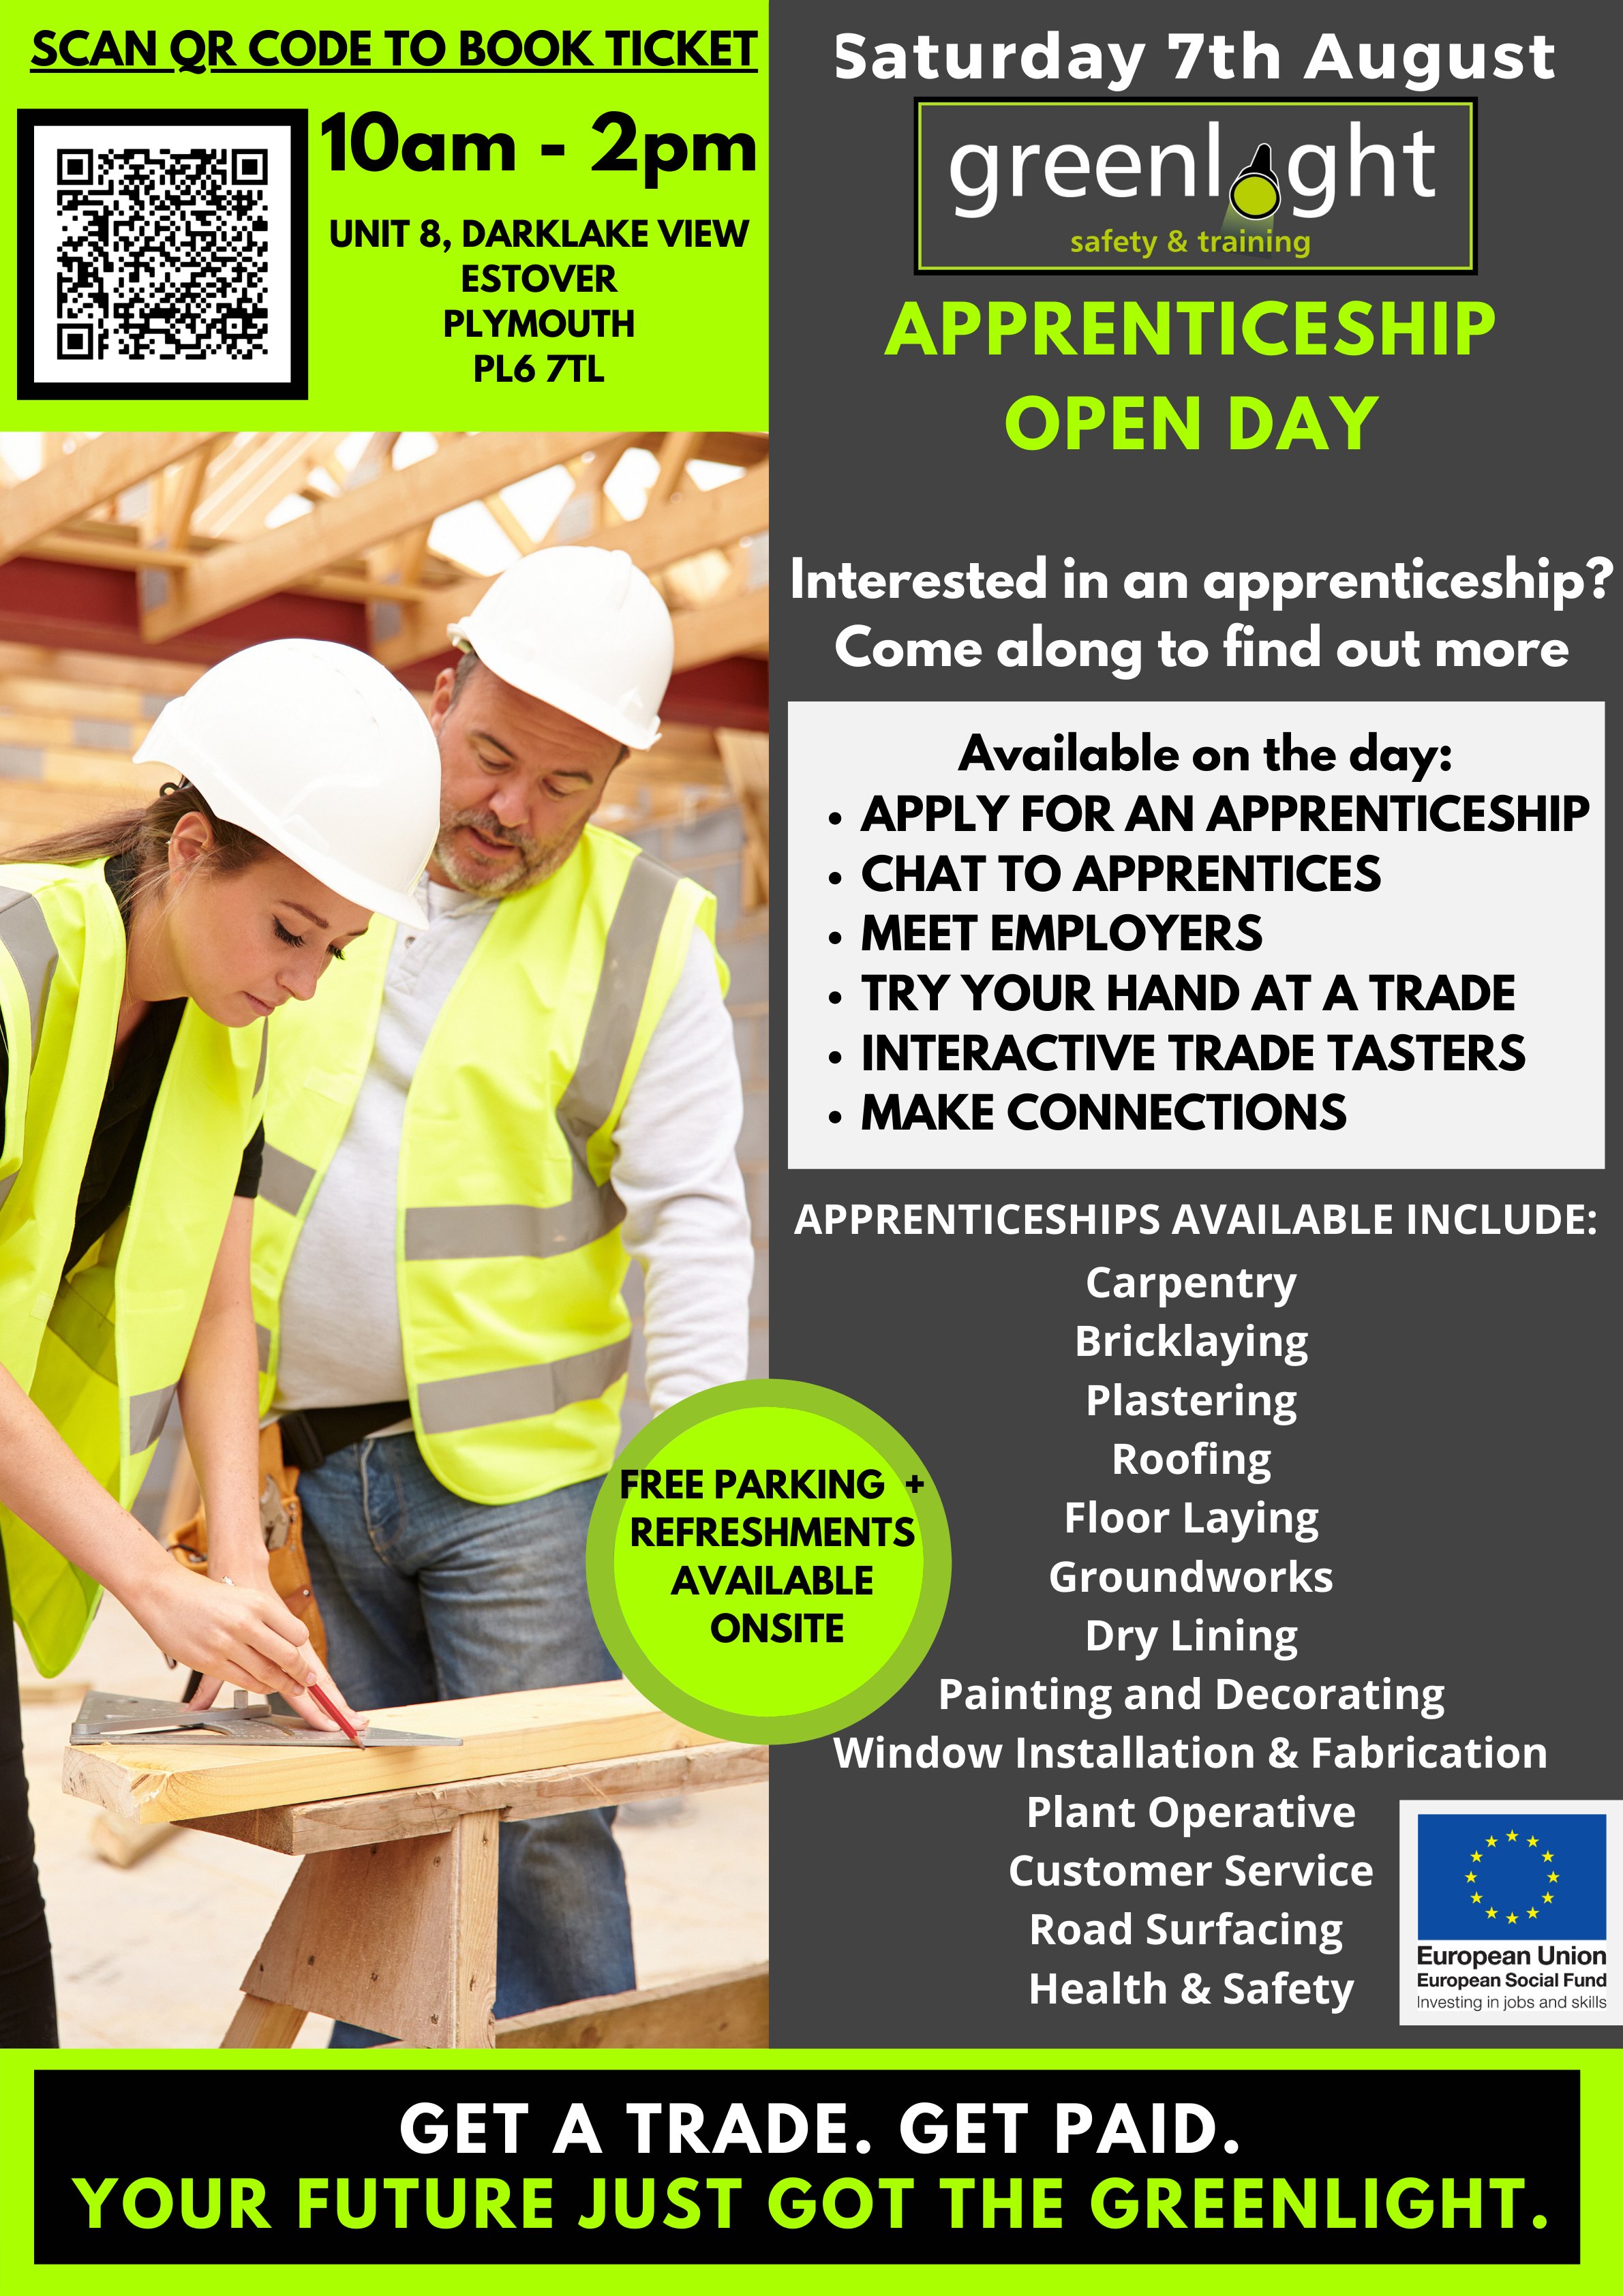 Greenlight Safety Training On Twitter Construction Apprenticeships If You Re Interested In An Apprenticeship Come On Down To Our Apprenticeship Open Day On The 7th August Try A Trade Talk To